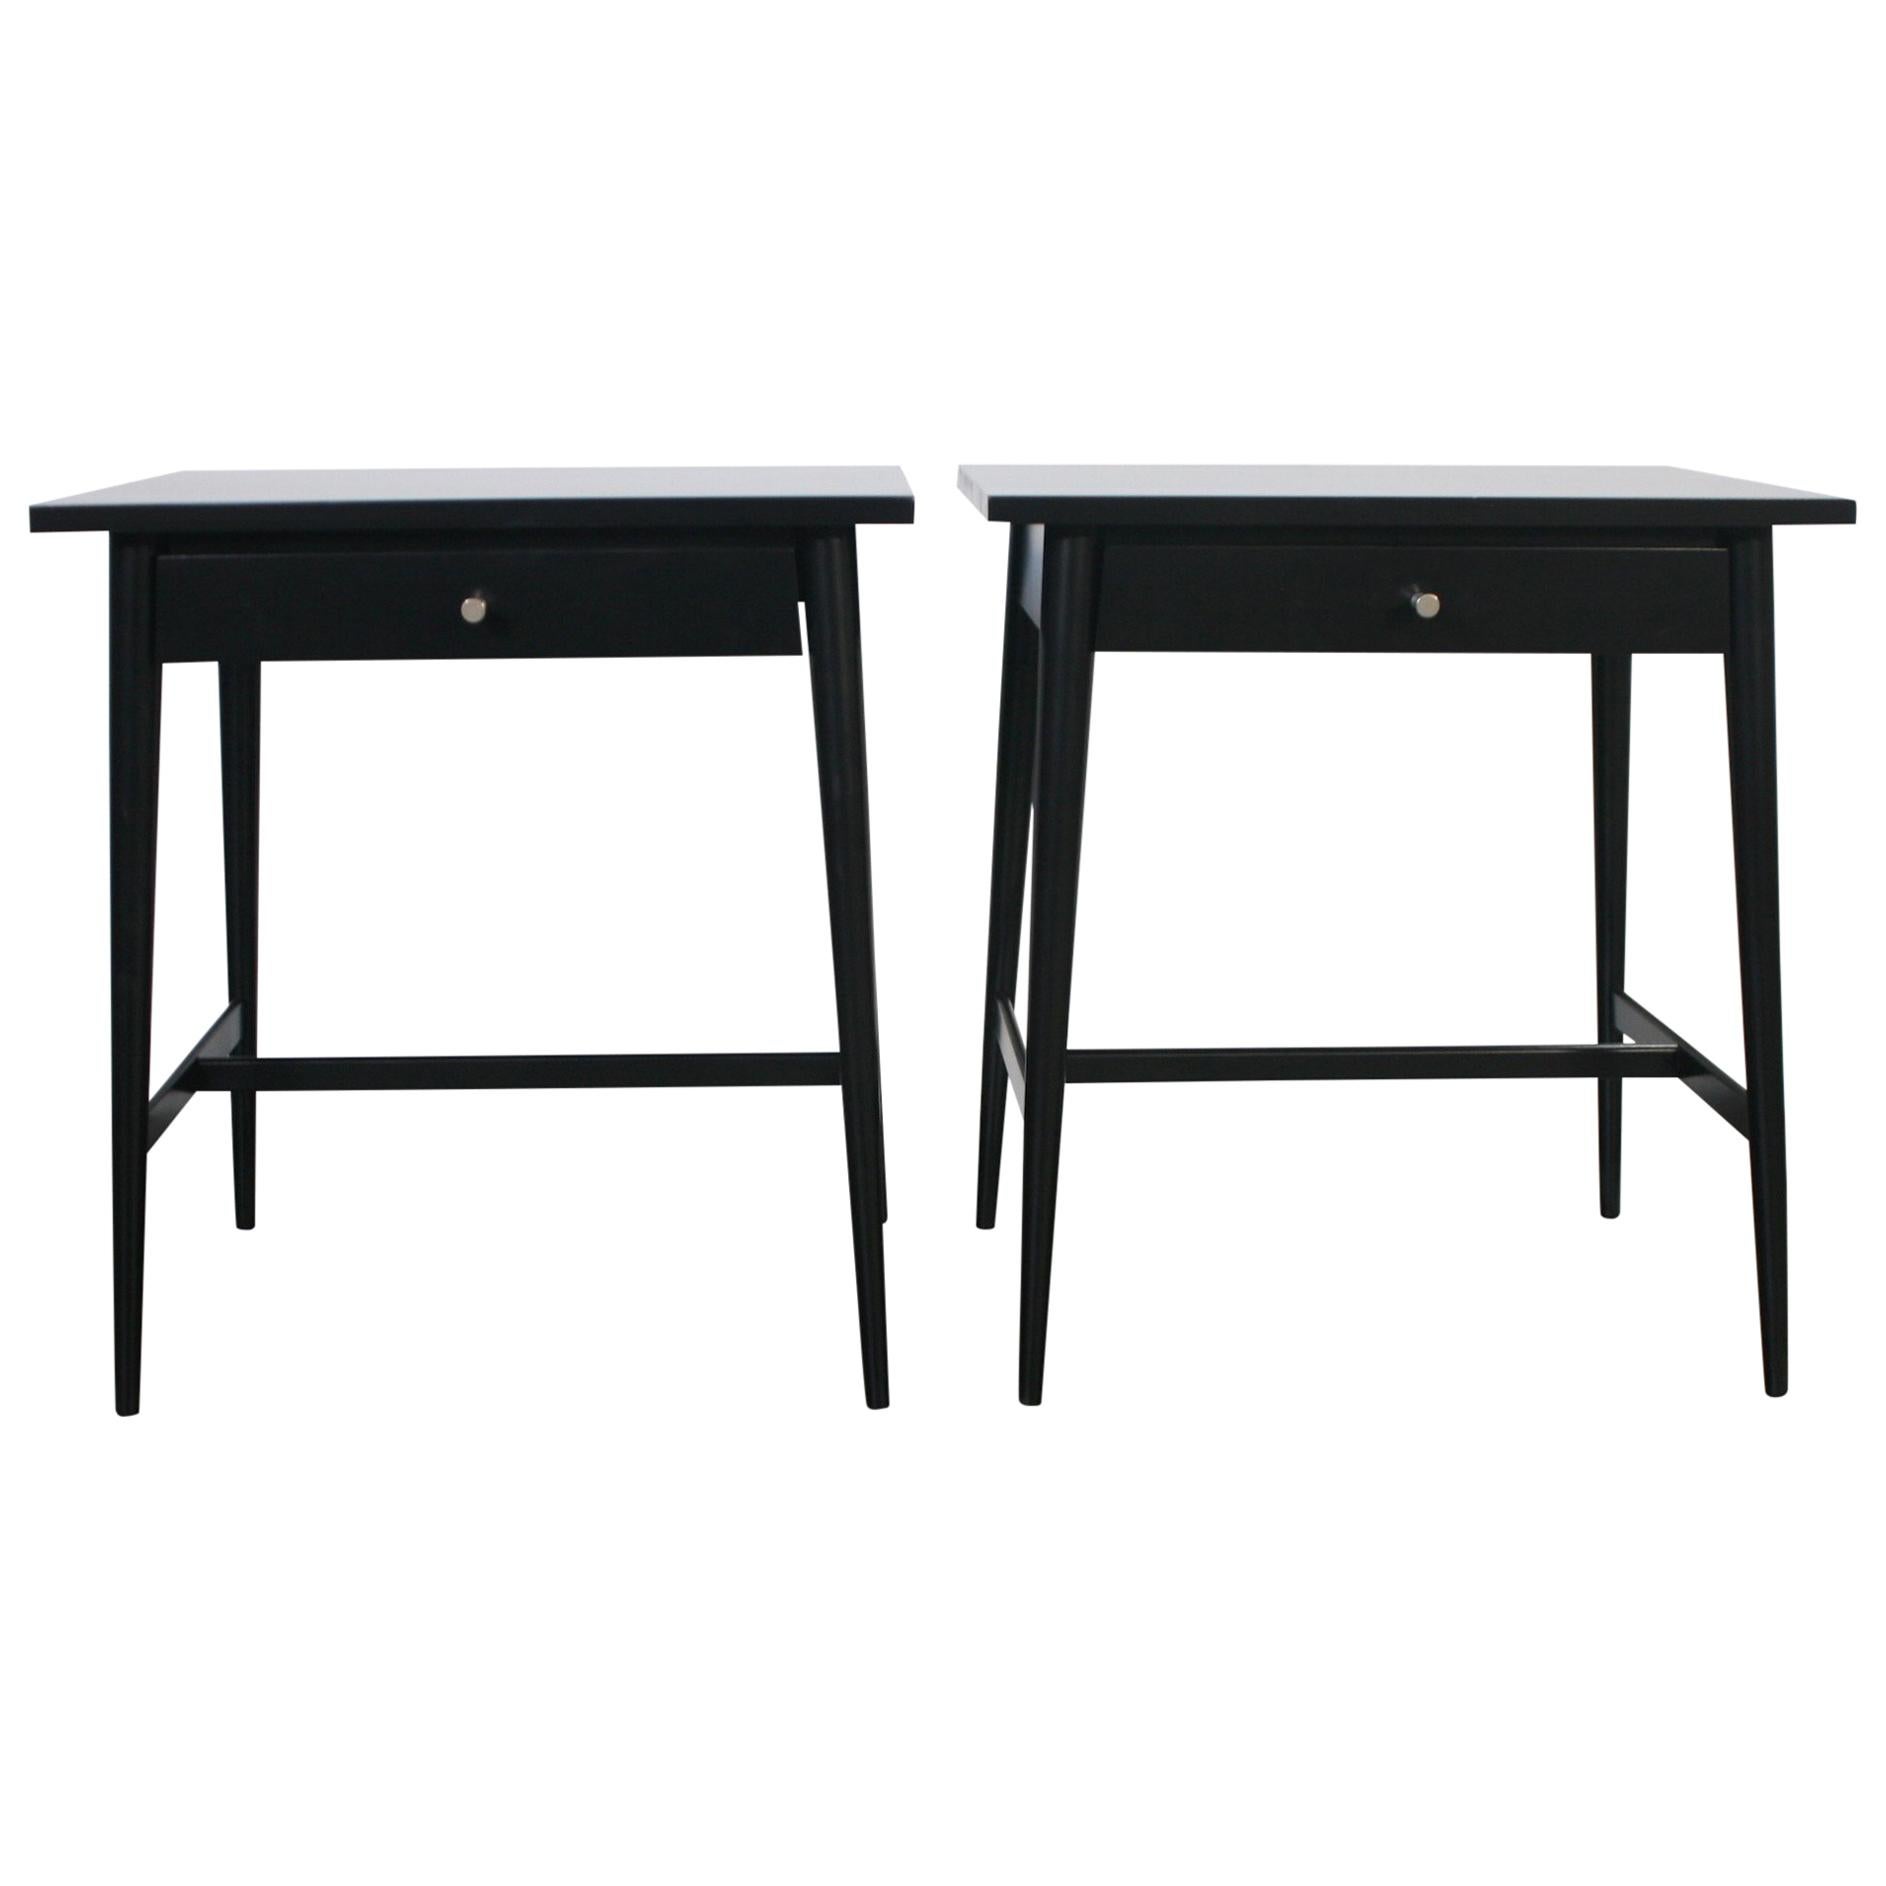 Midcentury Paul McCobb #1586 Nightstands Black Lacquer Finish Nickel Knobs